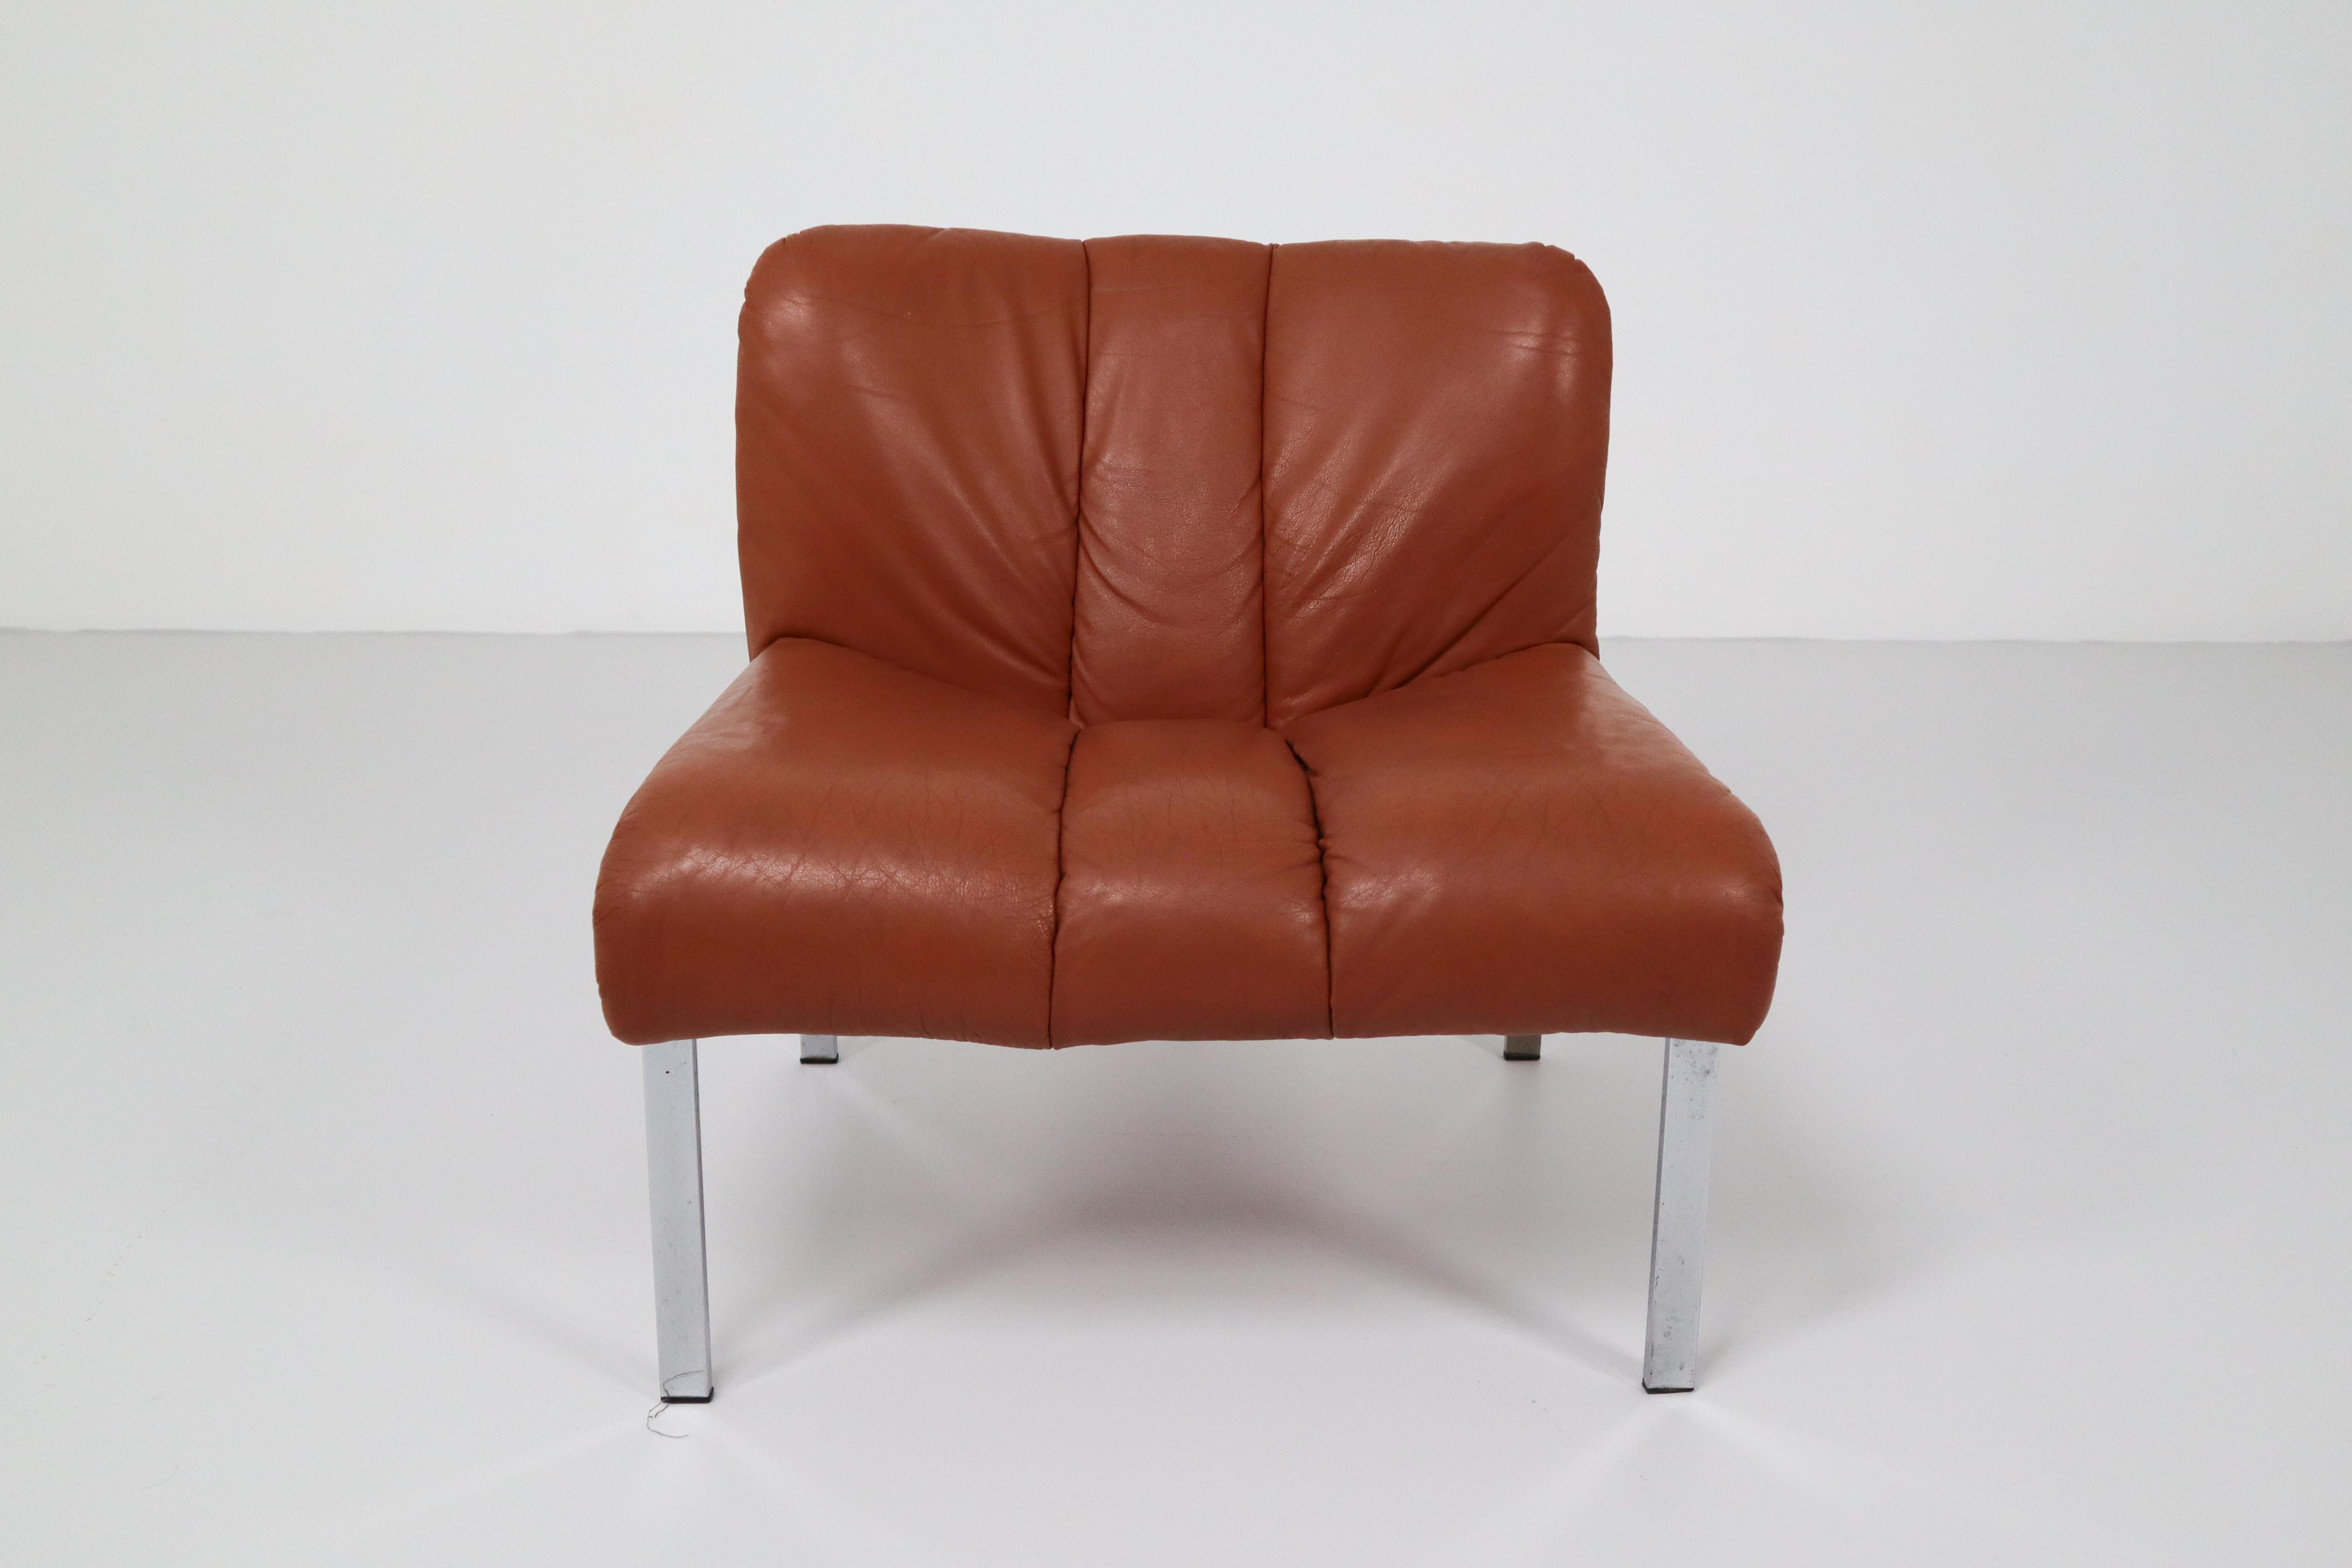 Set of Three Chairs, Sofa in Cognac Leather by Girsberger, Switzerland, 1970s 4